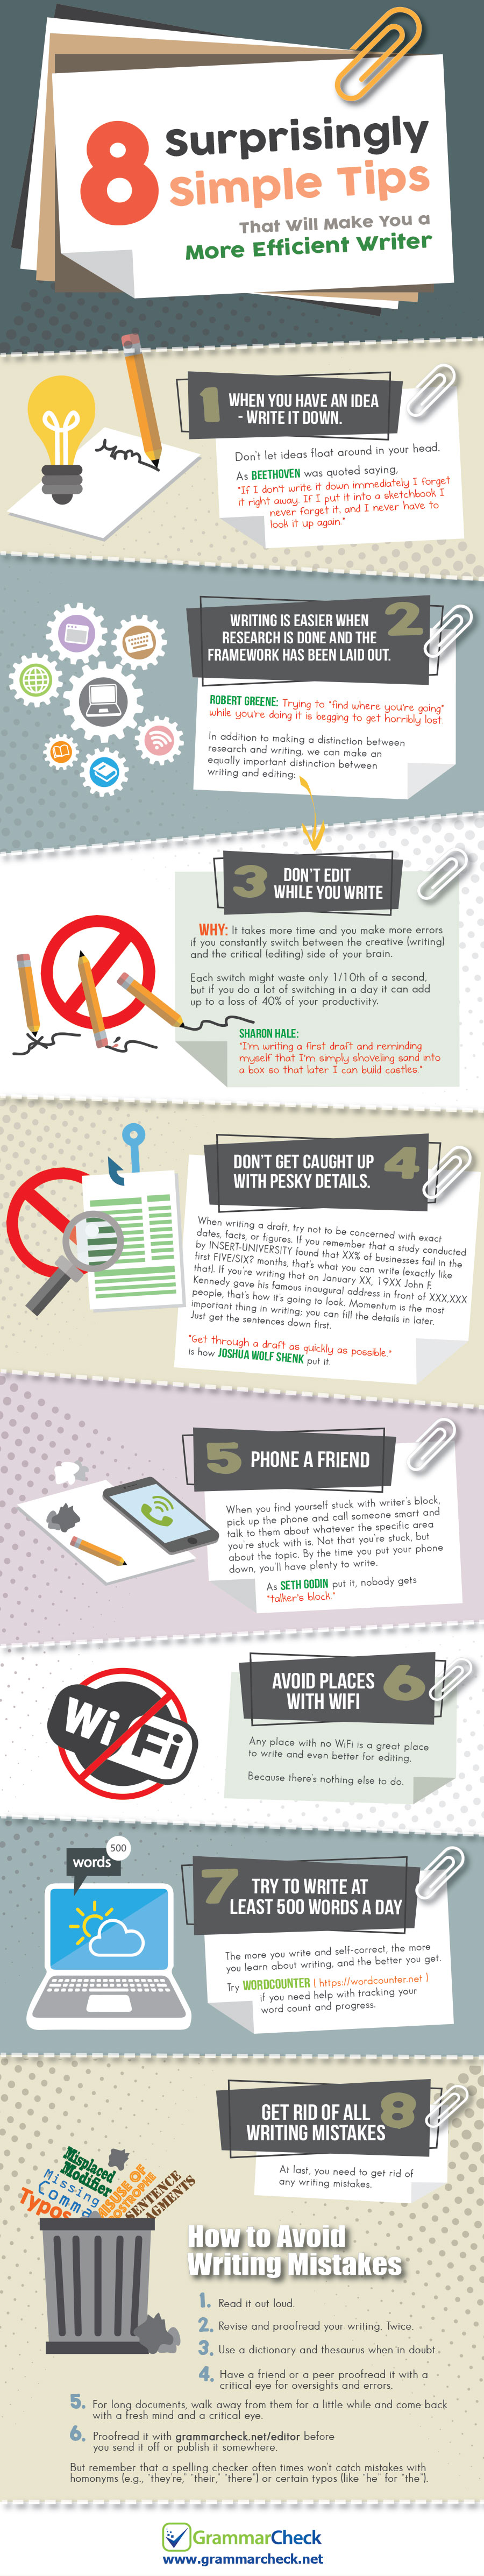 8 Surprisingly Simple Tips That Will Make You a More Efficient Writer (Infographic)